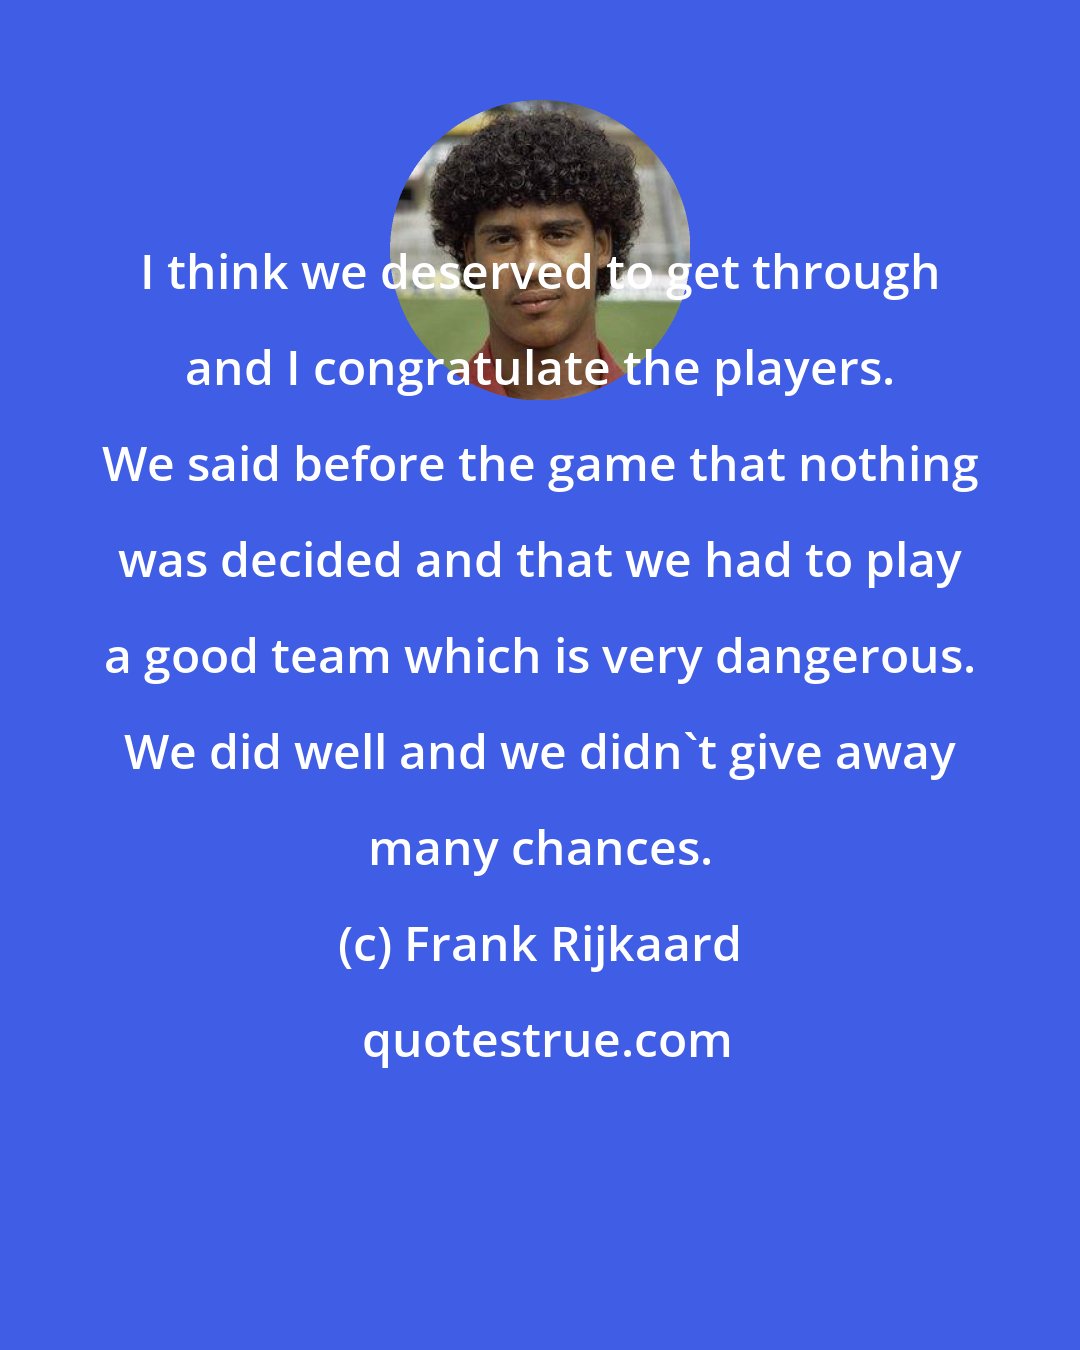 Frank Rijkaard: I think we deserved to get through and I congratulate the players. We said before the game that nothing was decided and that we had to play a good team which is very dangerous. We did well and we didn't give away many chances.